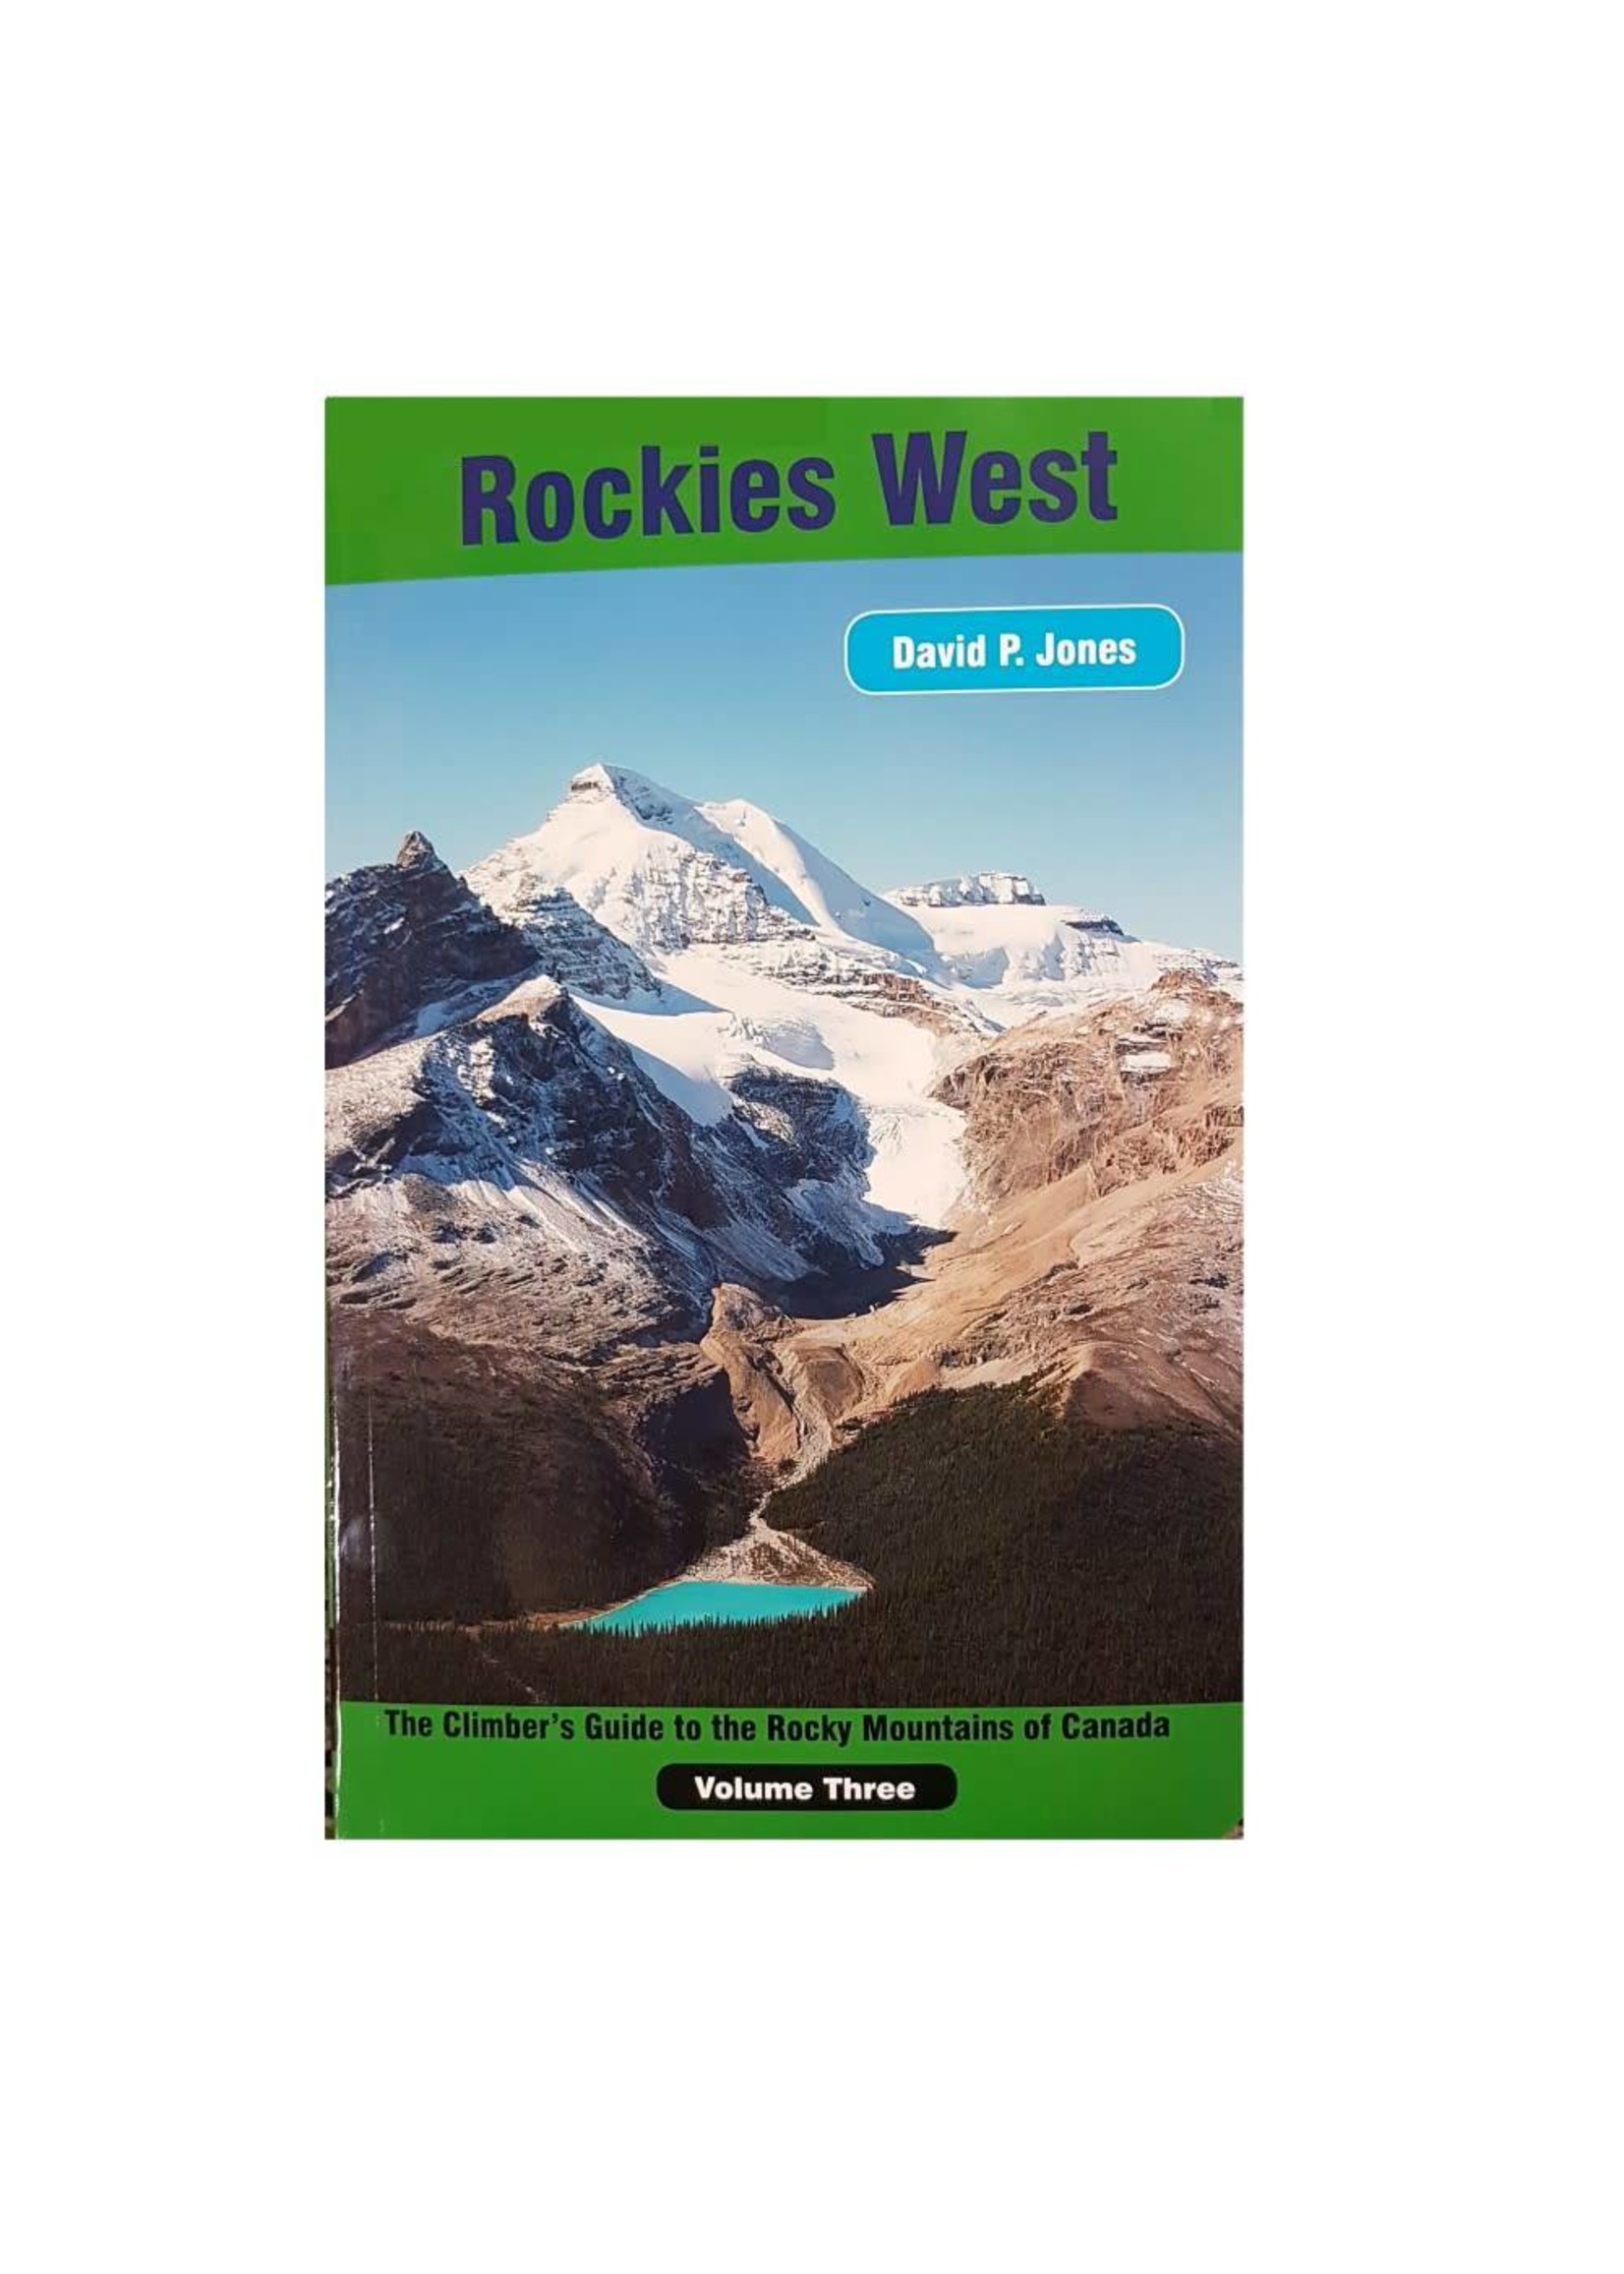 Rockies West Climbing Guide - Volume 3